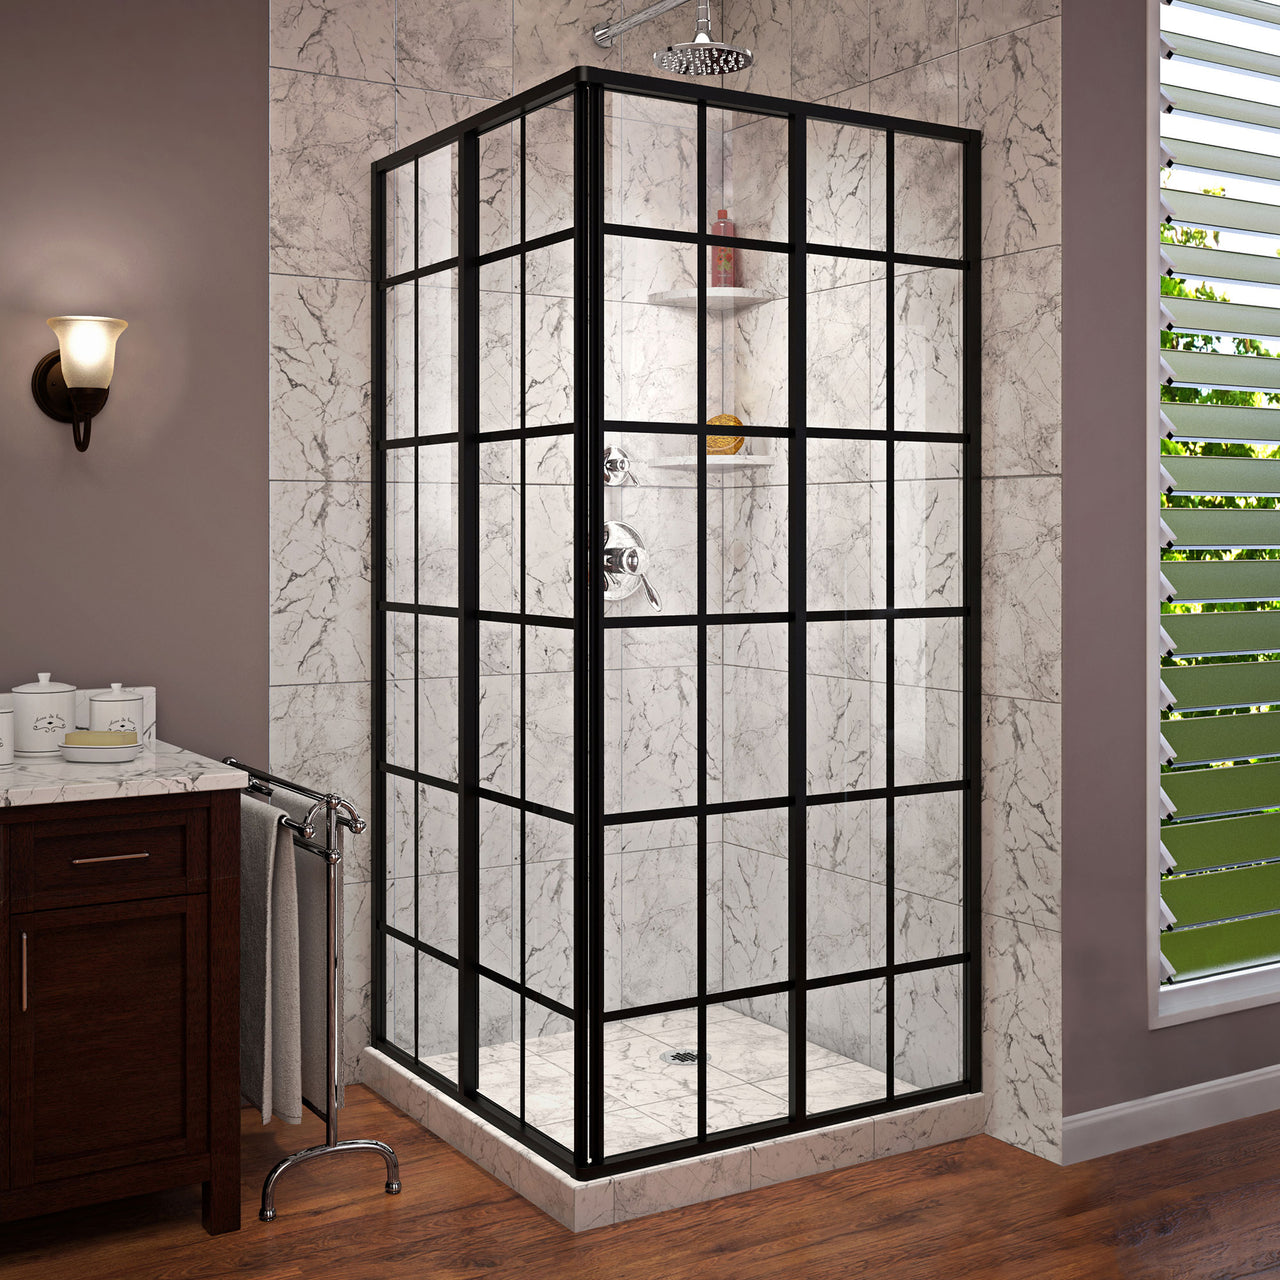 DreamLine French Corner 34 1/2 in. D x 34 1/2 in. W x 72 in. H Framed Sliding Shower Enclosure - BNGBath